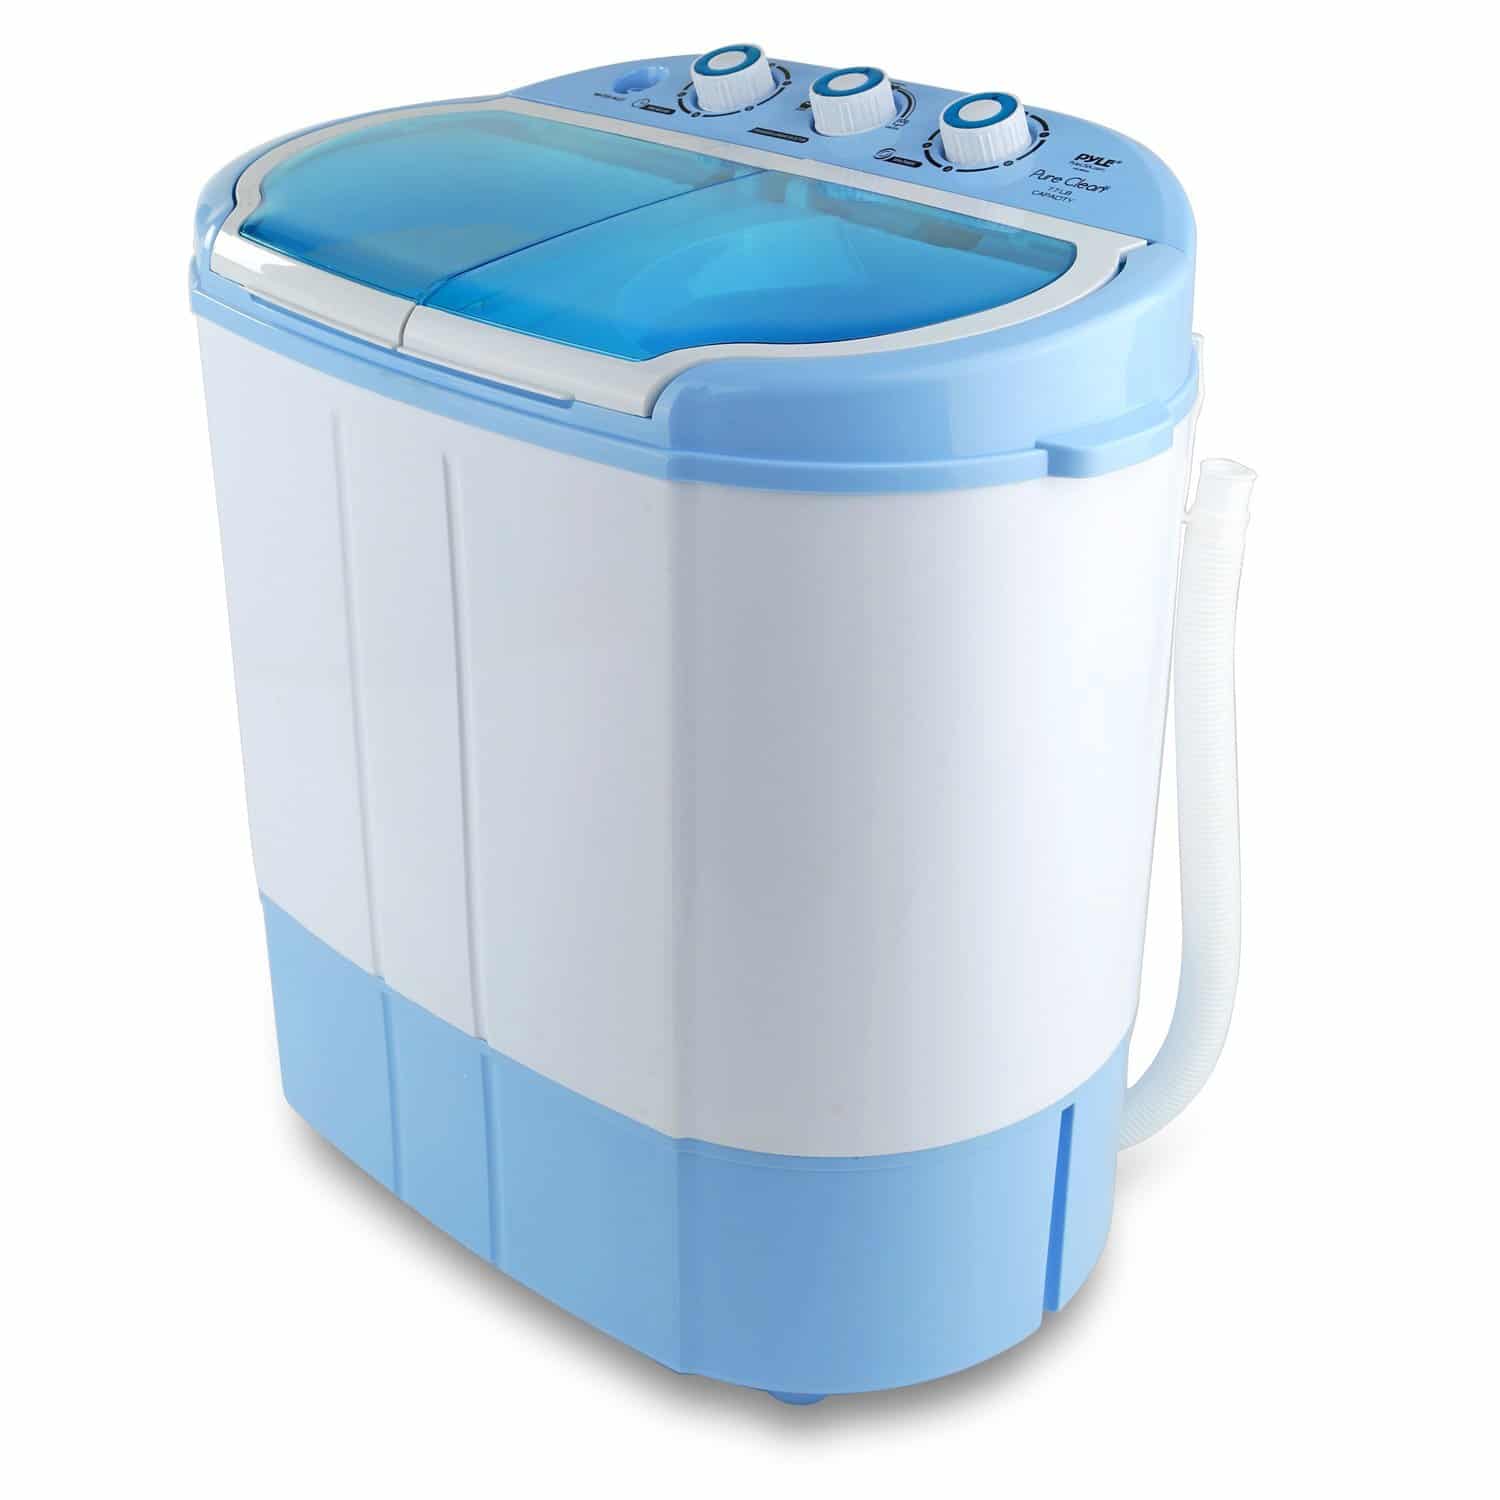 Best Portable Washing Machines 2018: Electric Compact Washer Dryer Combo